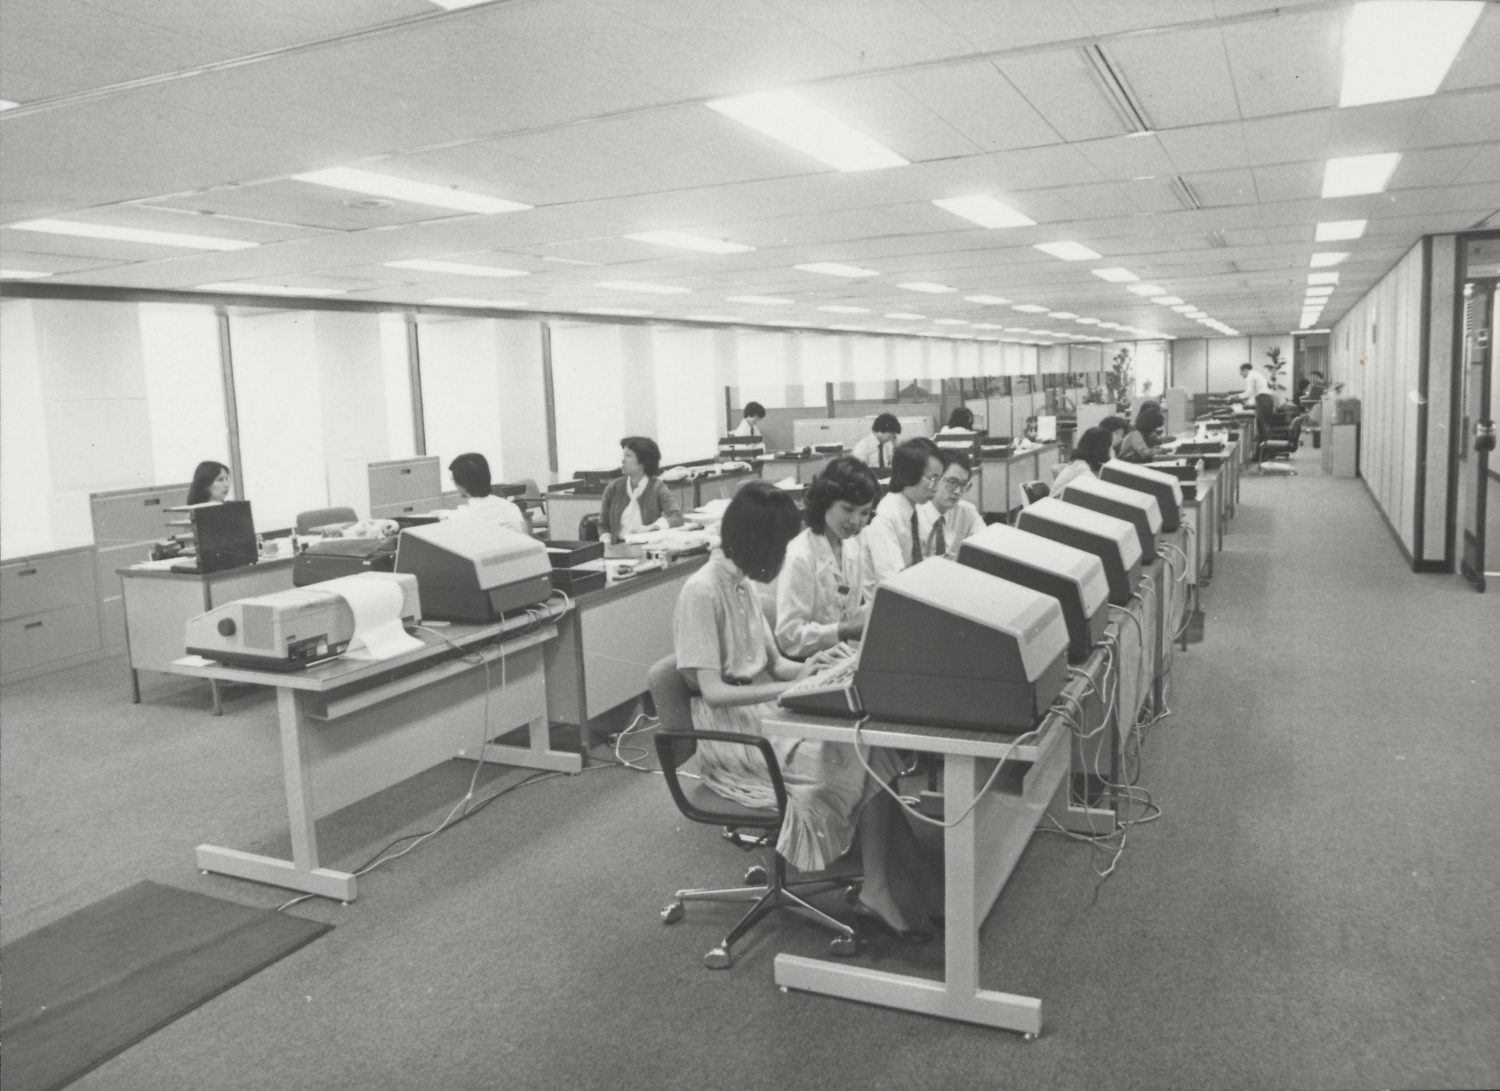 Photo of employees working at terminals in Hewlett-Packard's Hong Kong office in 1981.